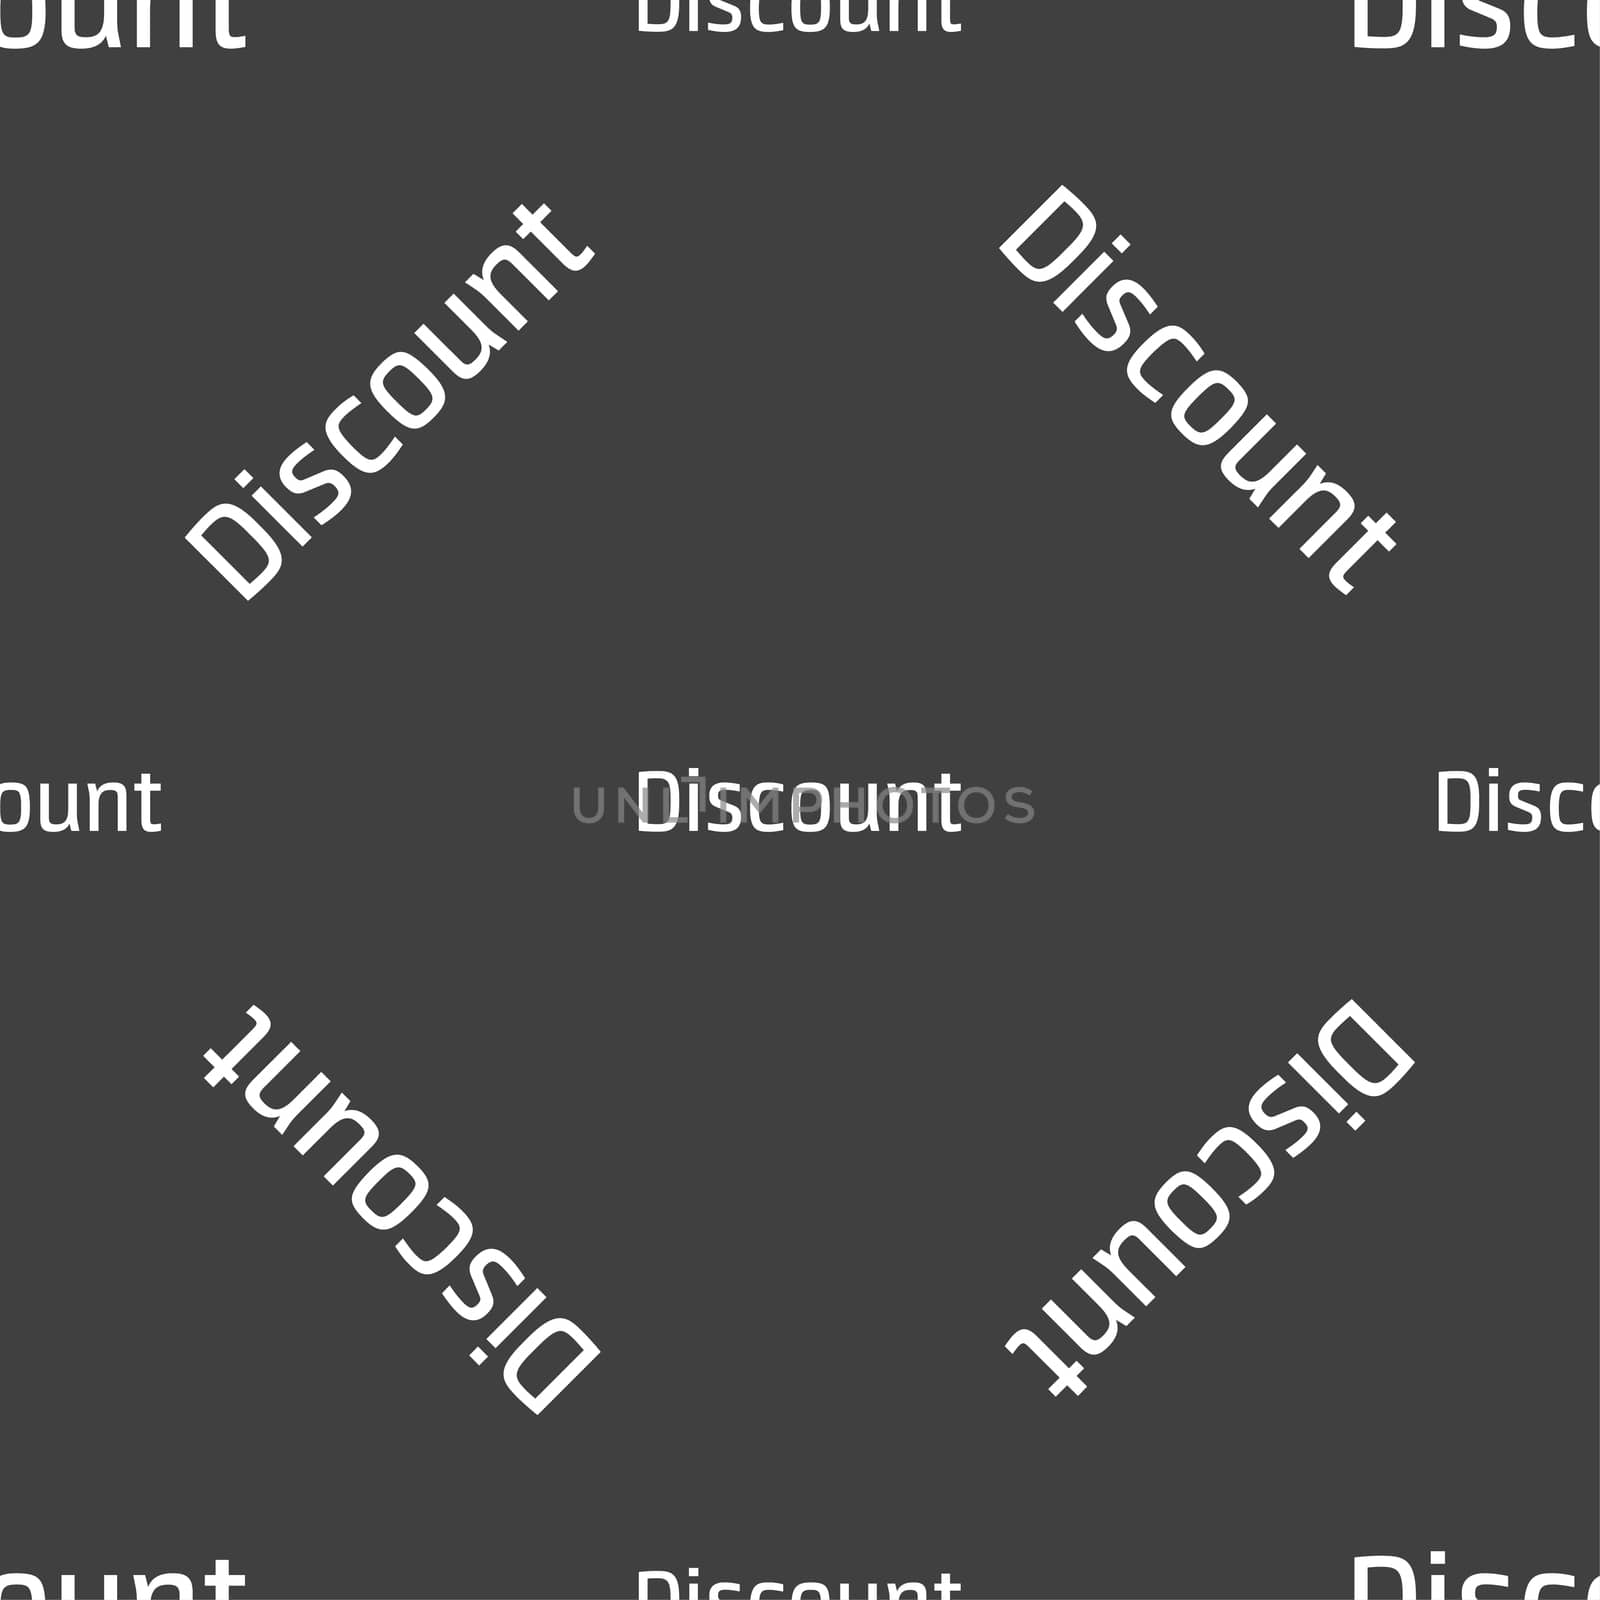 discount sign icon. Sale symbol. Special offer label. Seamless pattern on a gray background. illustration